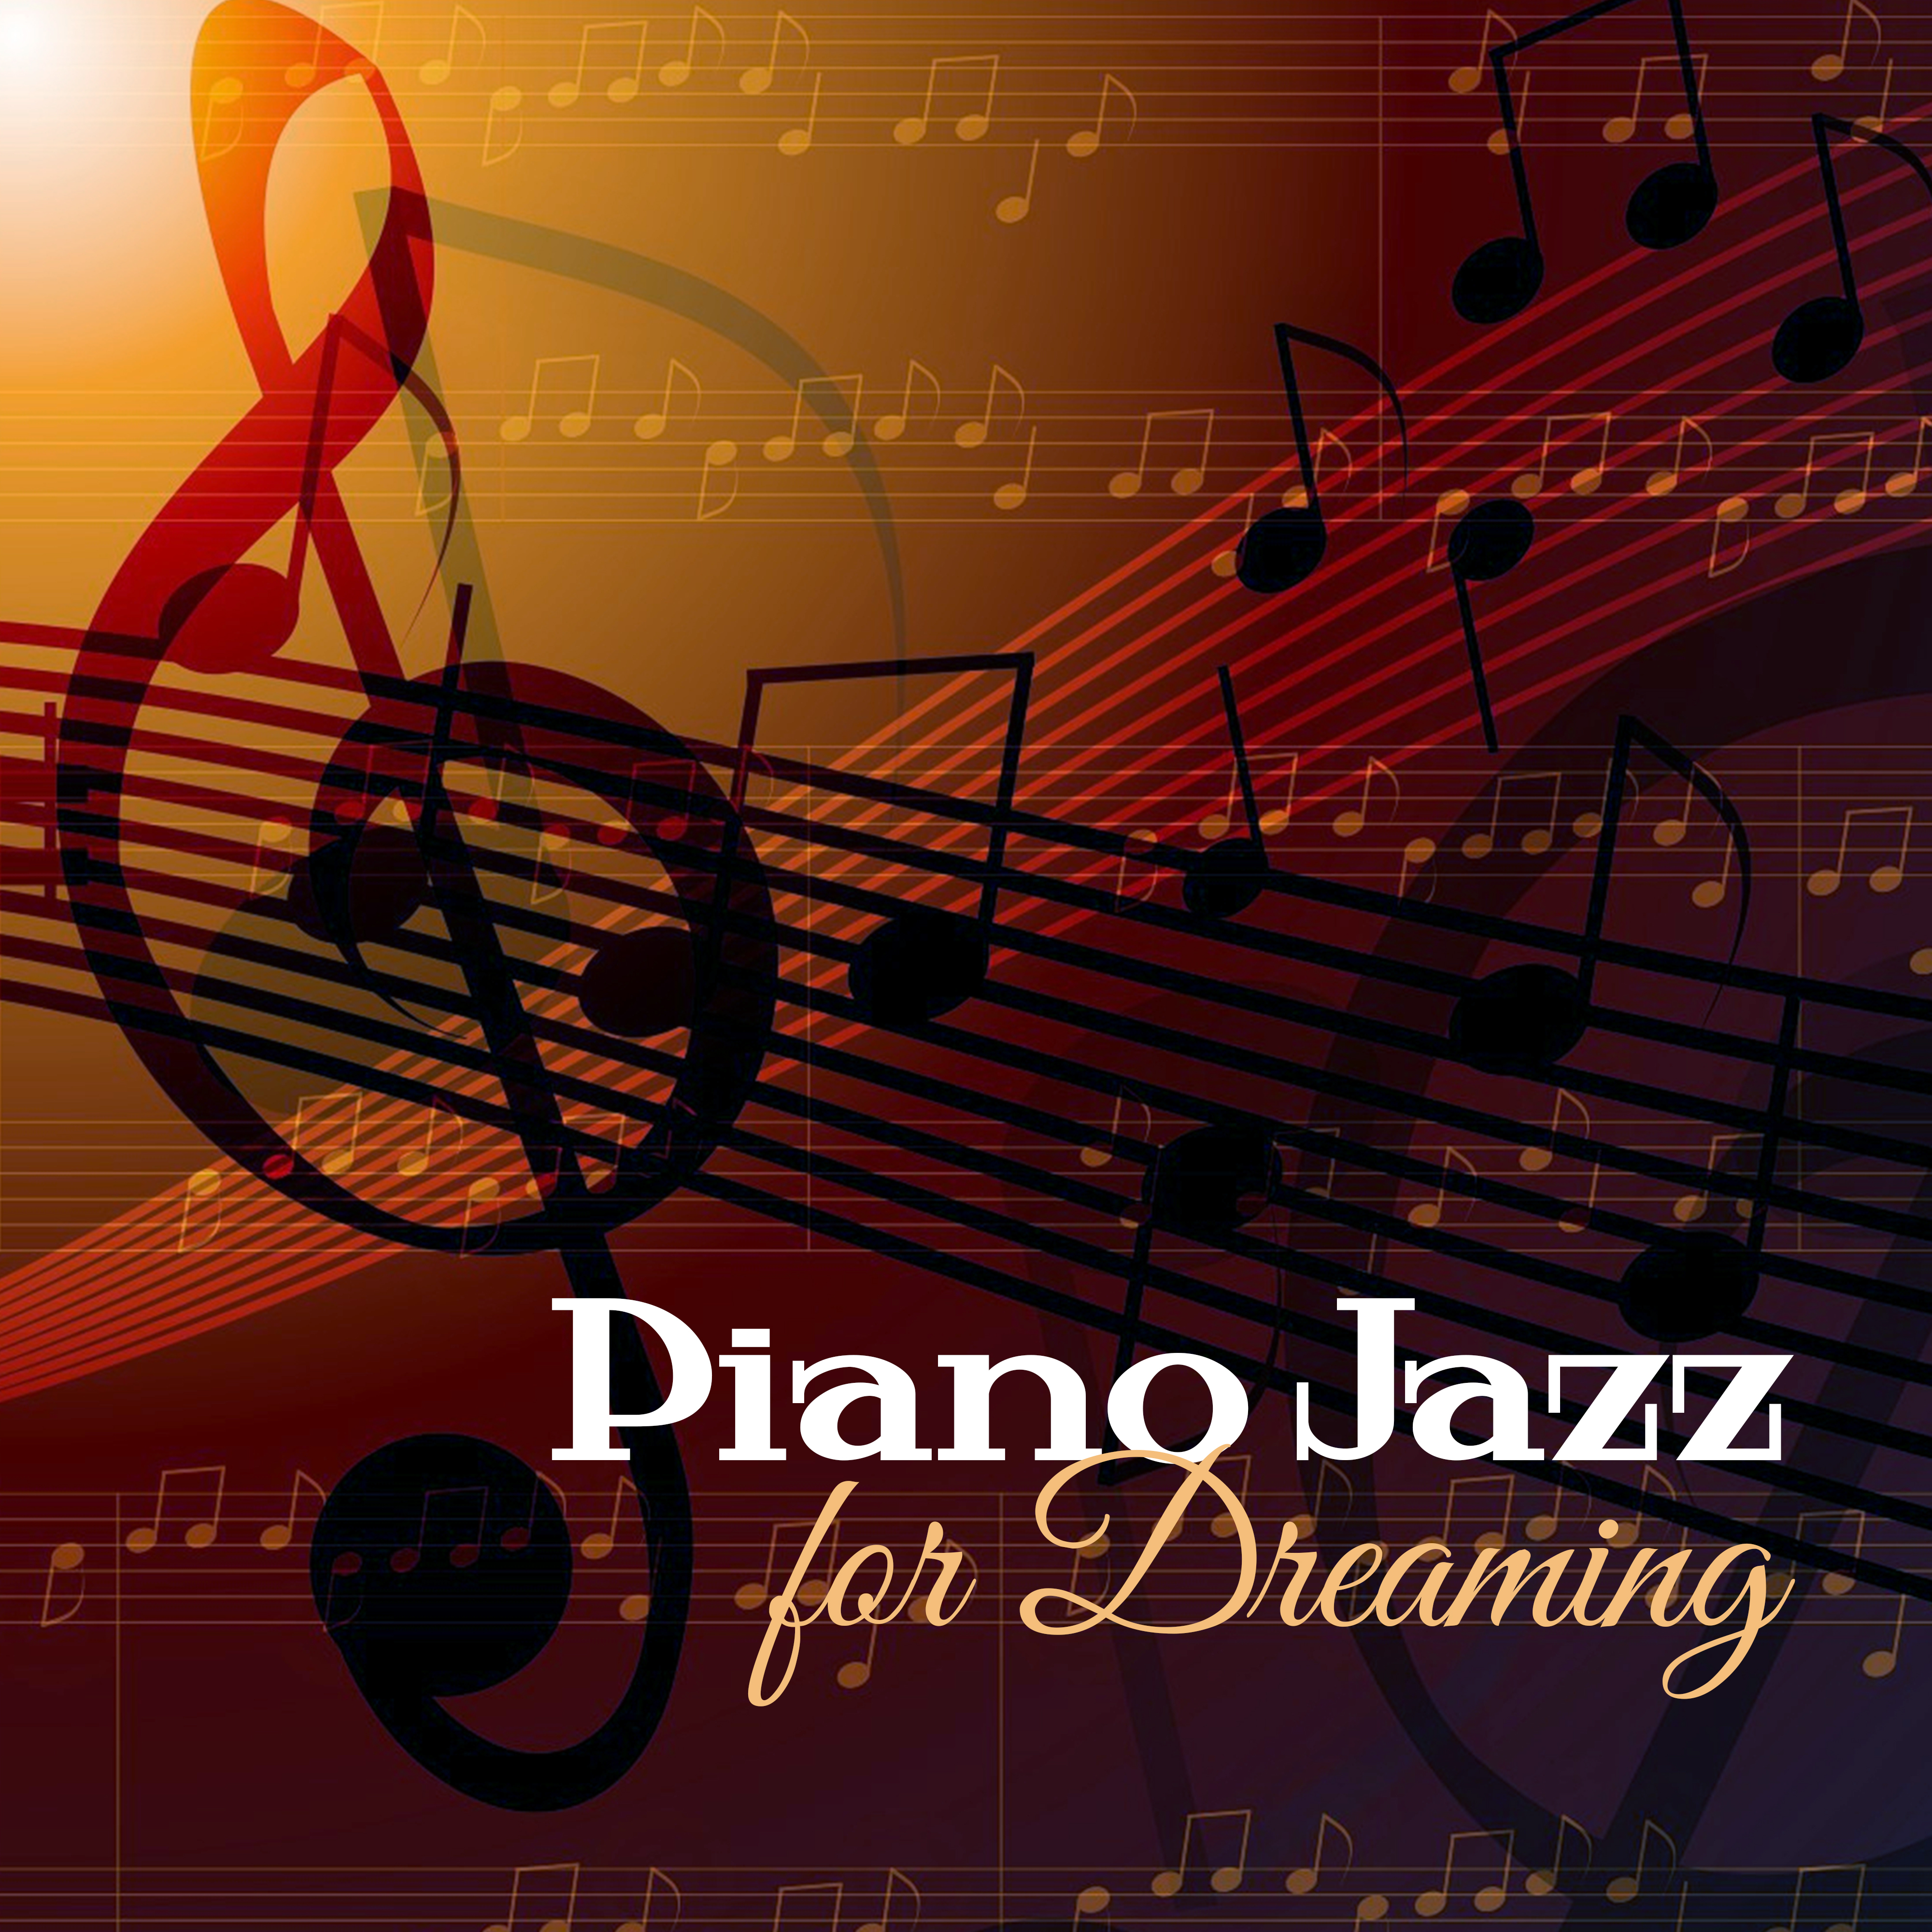 Piano Jazz for Dreaming  Soft Jazz Music for Night, Sleeping Memories, Stress Relief